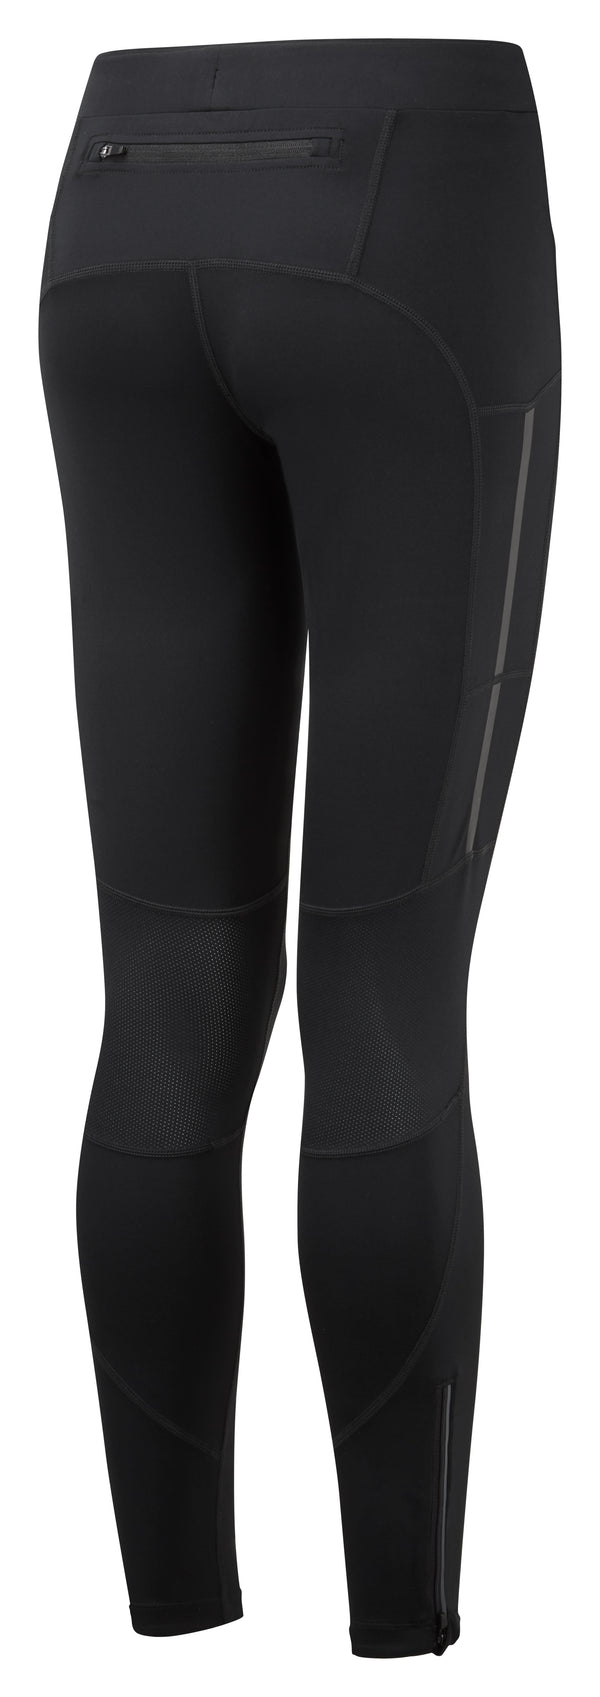 Ronhill | Wmn's Tech Revive Stretch Tight | All Black | S